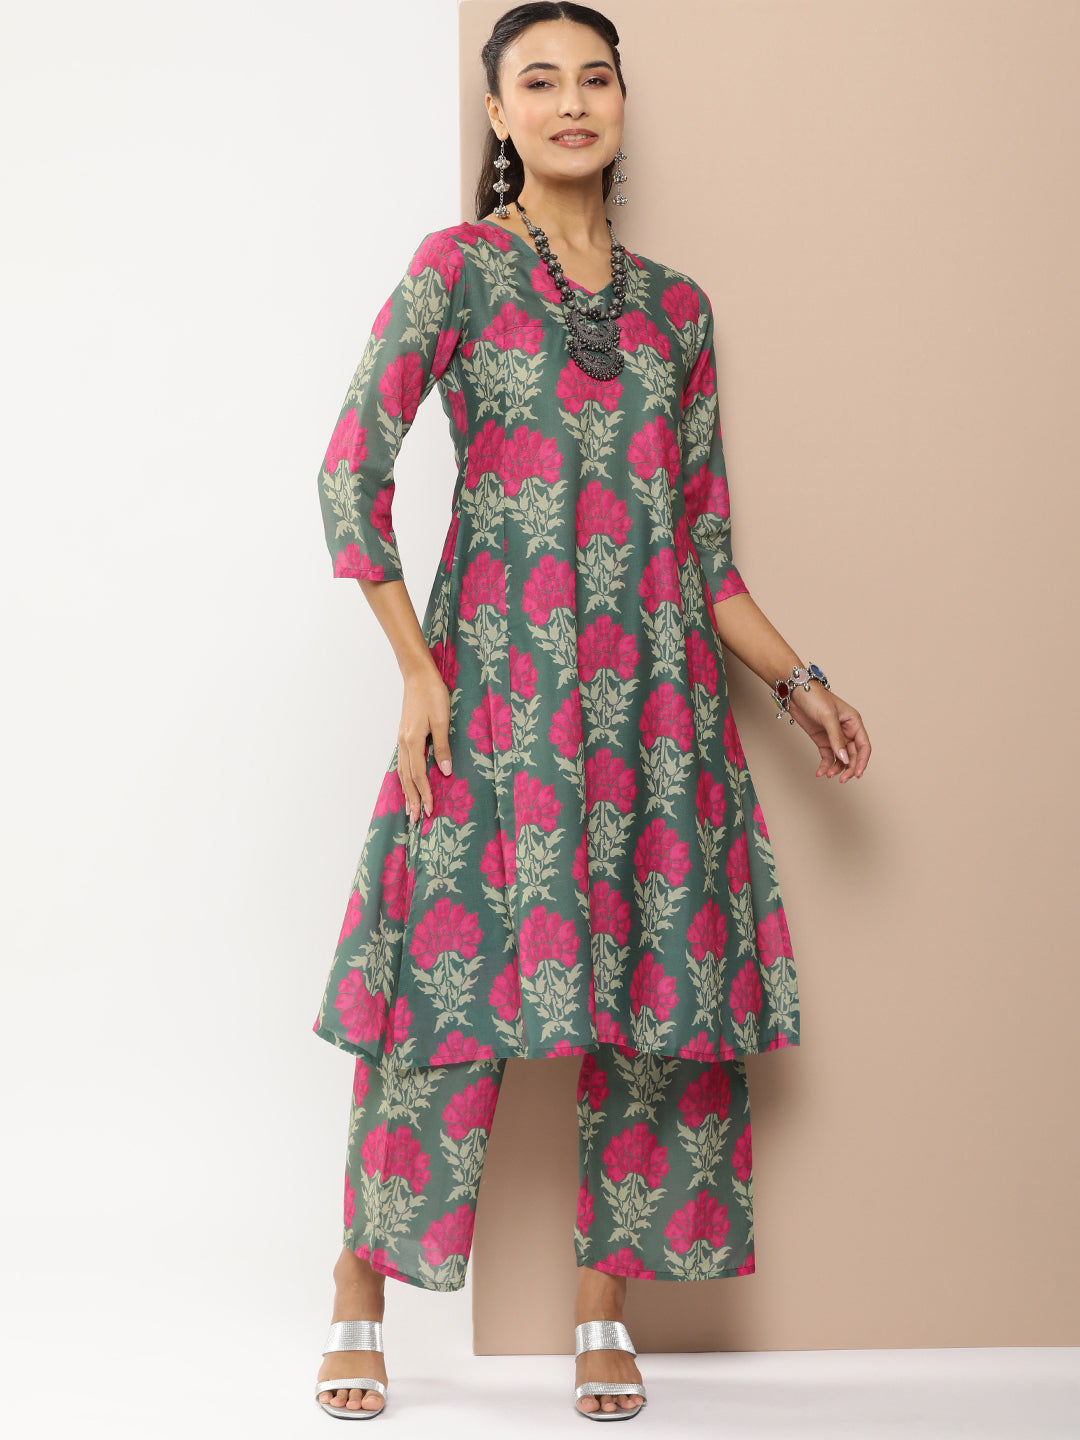 Bhama Couture Green Floral Print A-Line Kurta With Green Floral Print Palazzo.